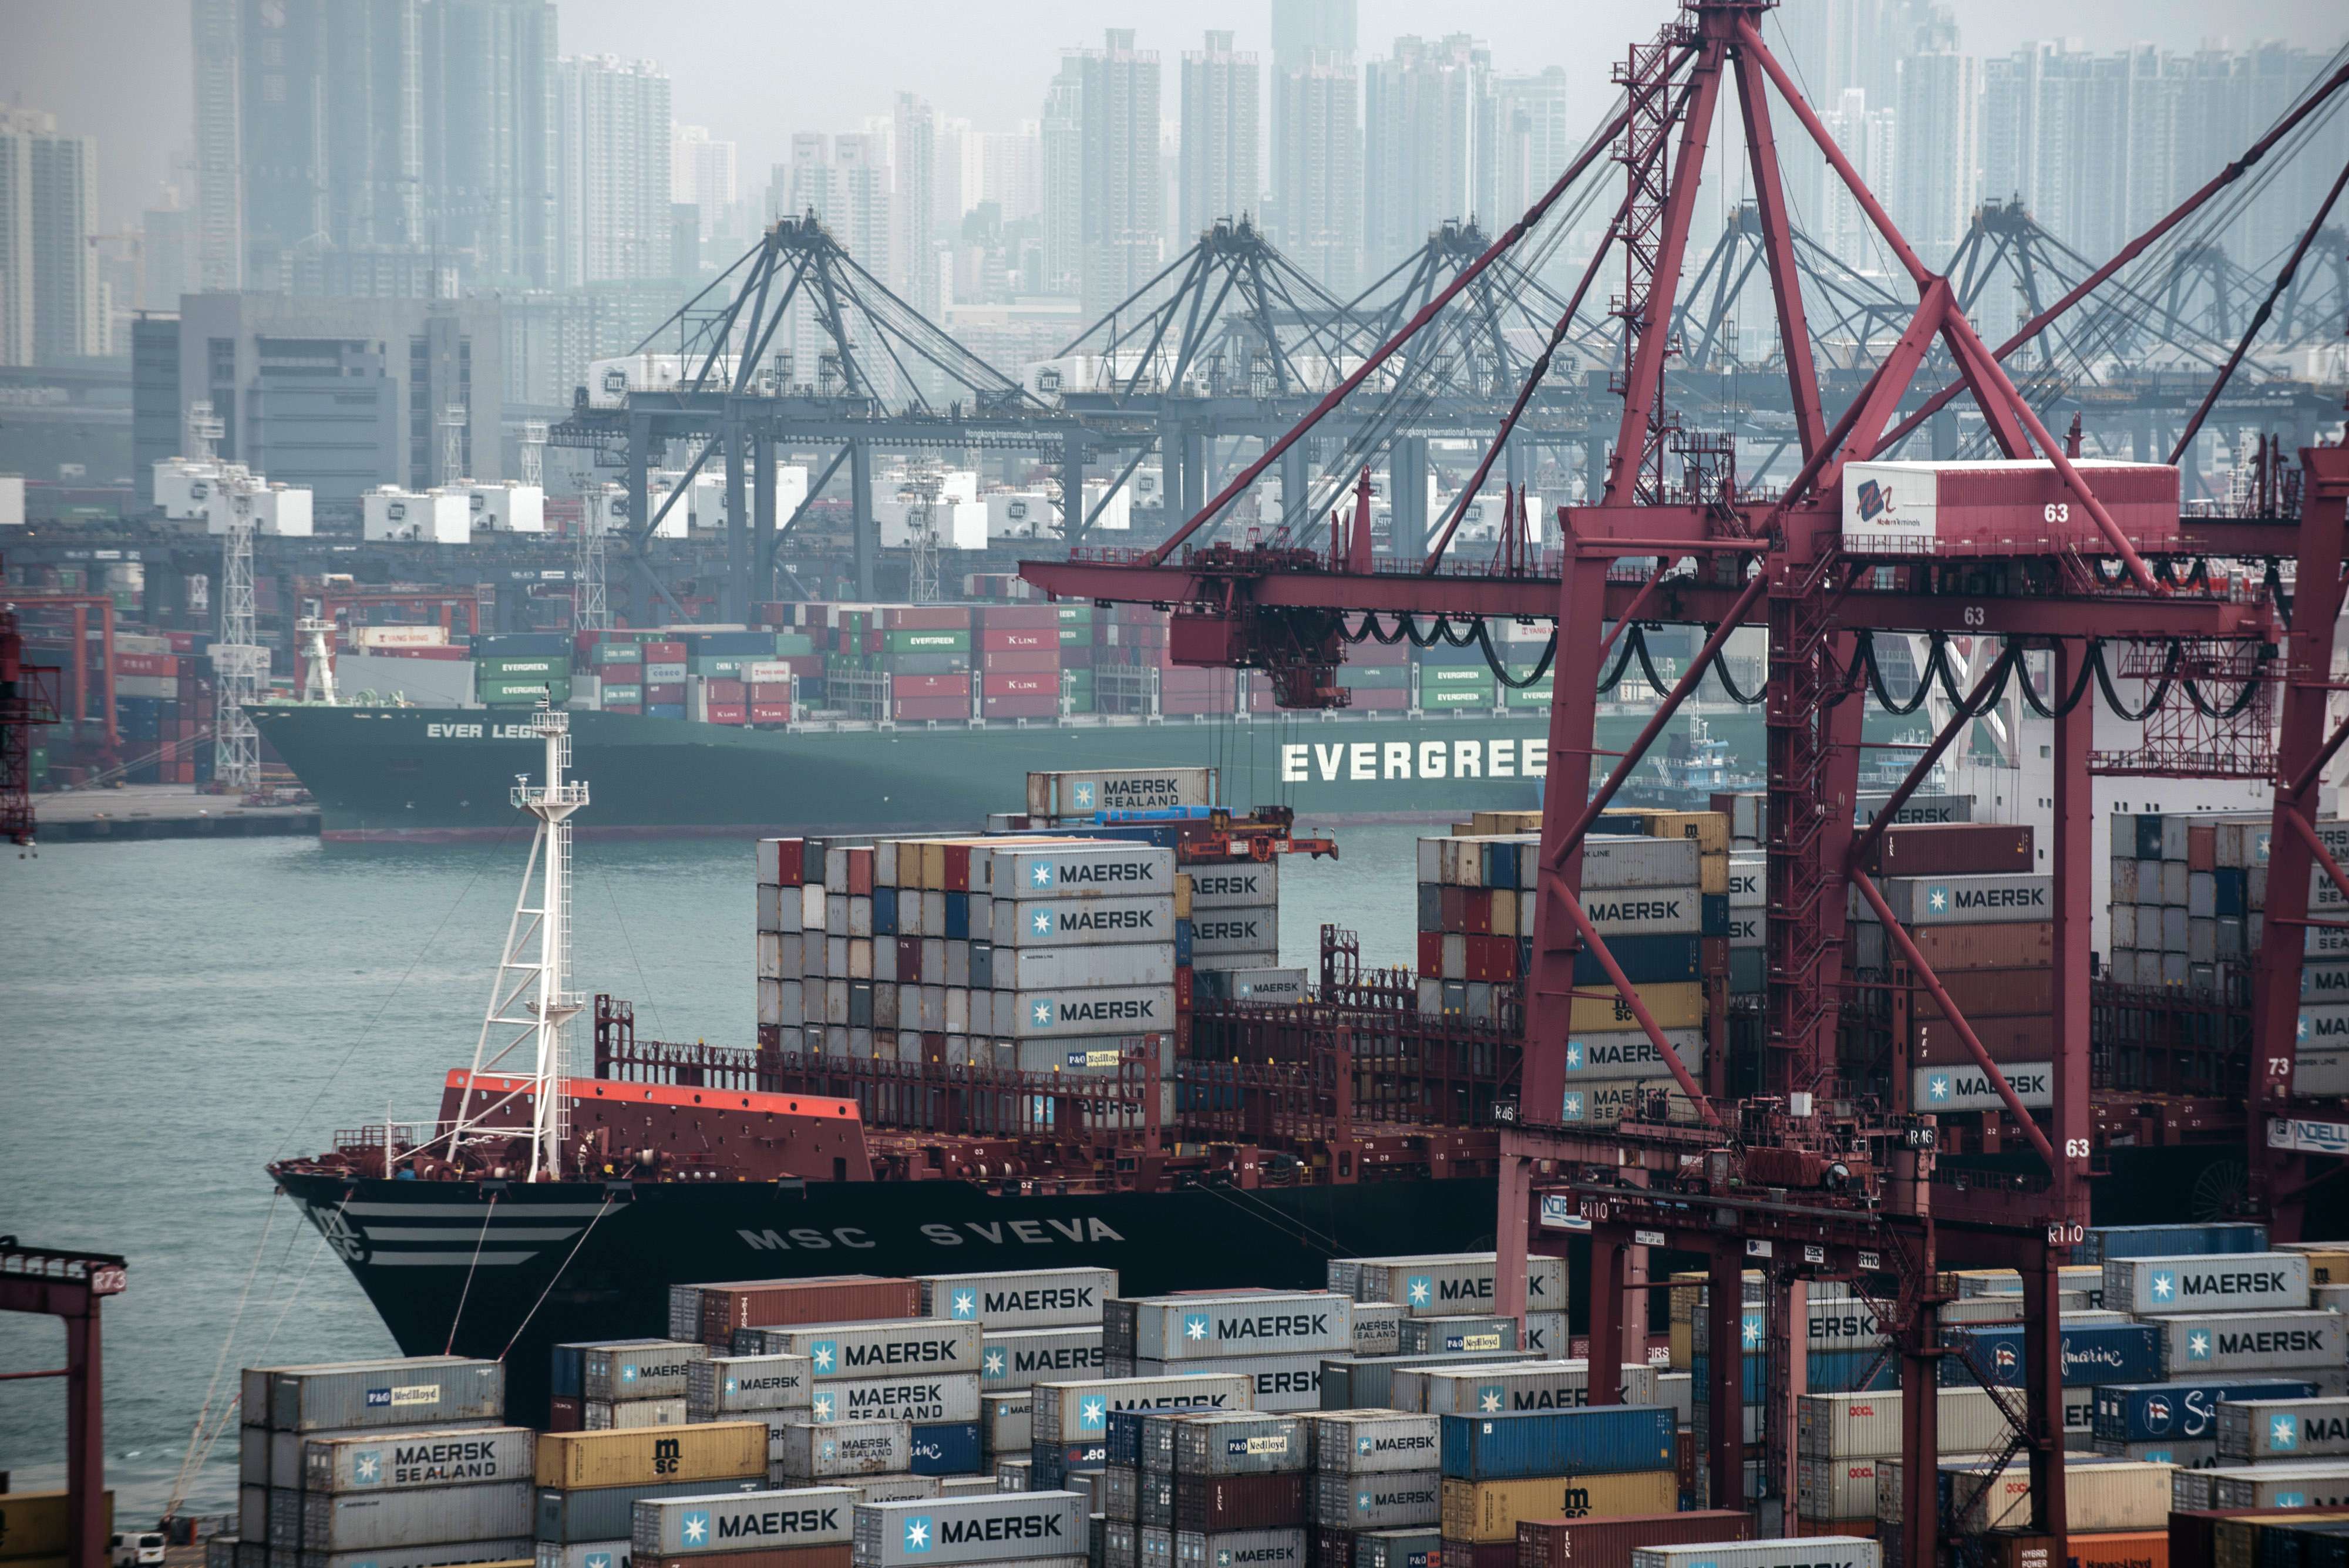 In 2016, Hong Kong was ranked as the fifth largest container port in the world, handling more than 19.8 million teu (20-foot equivalent units) of containerised goods. Photo: Bloomberg